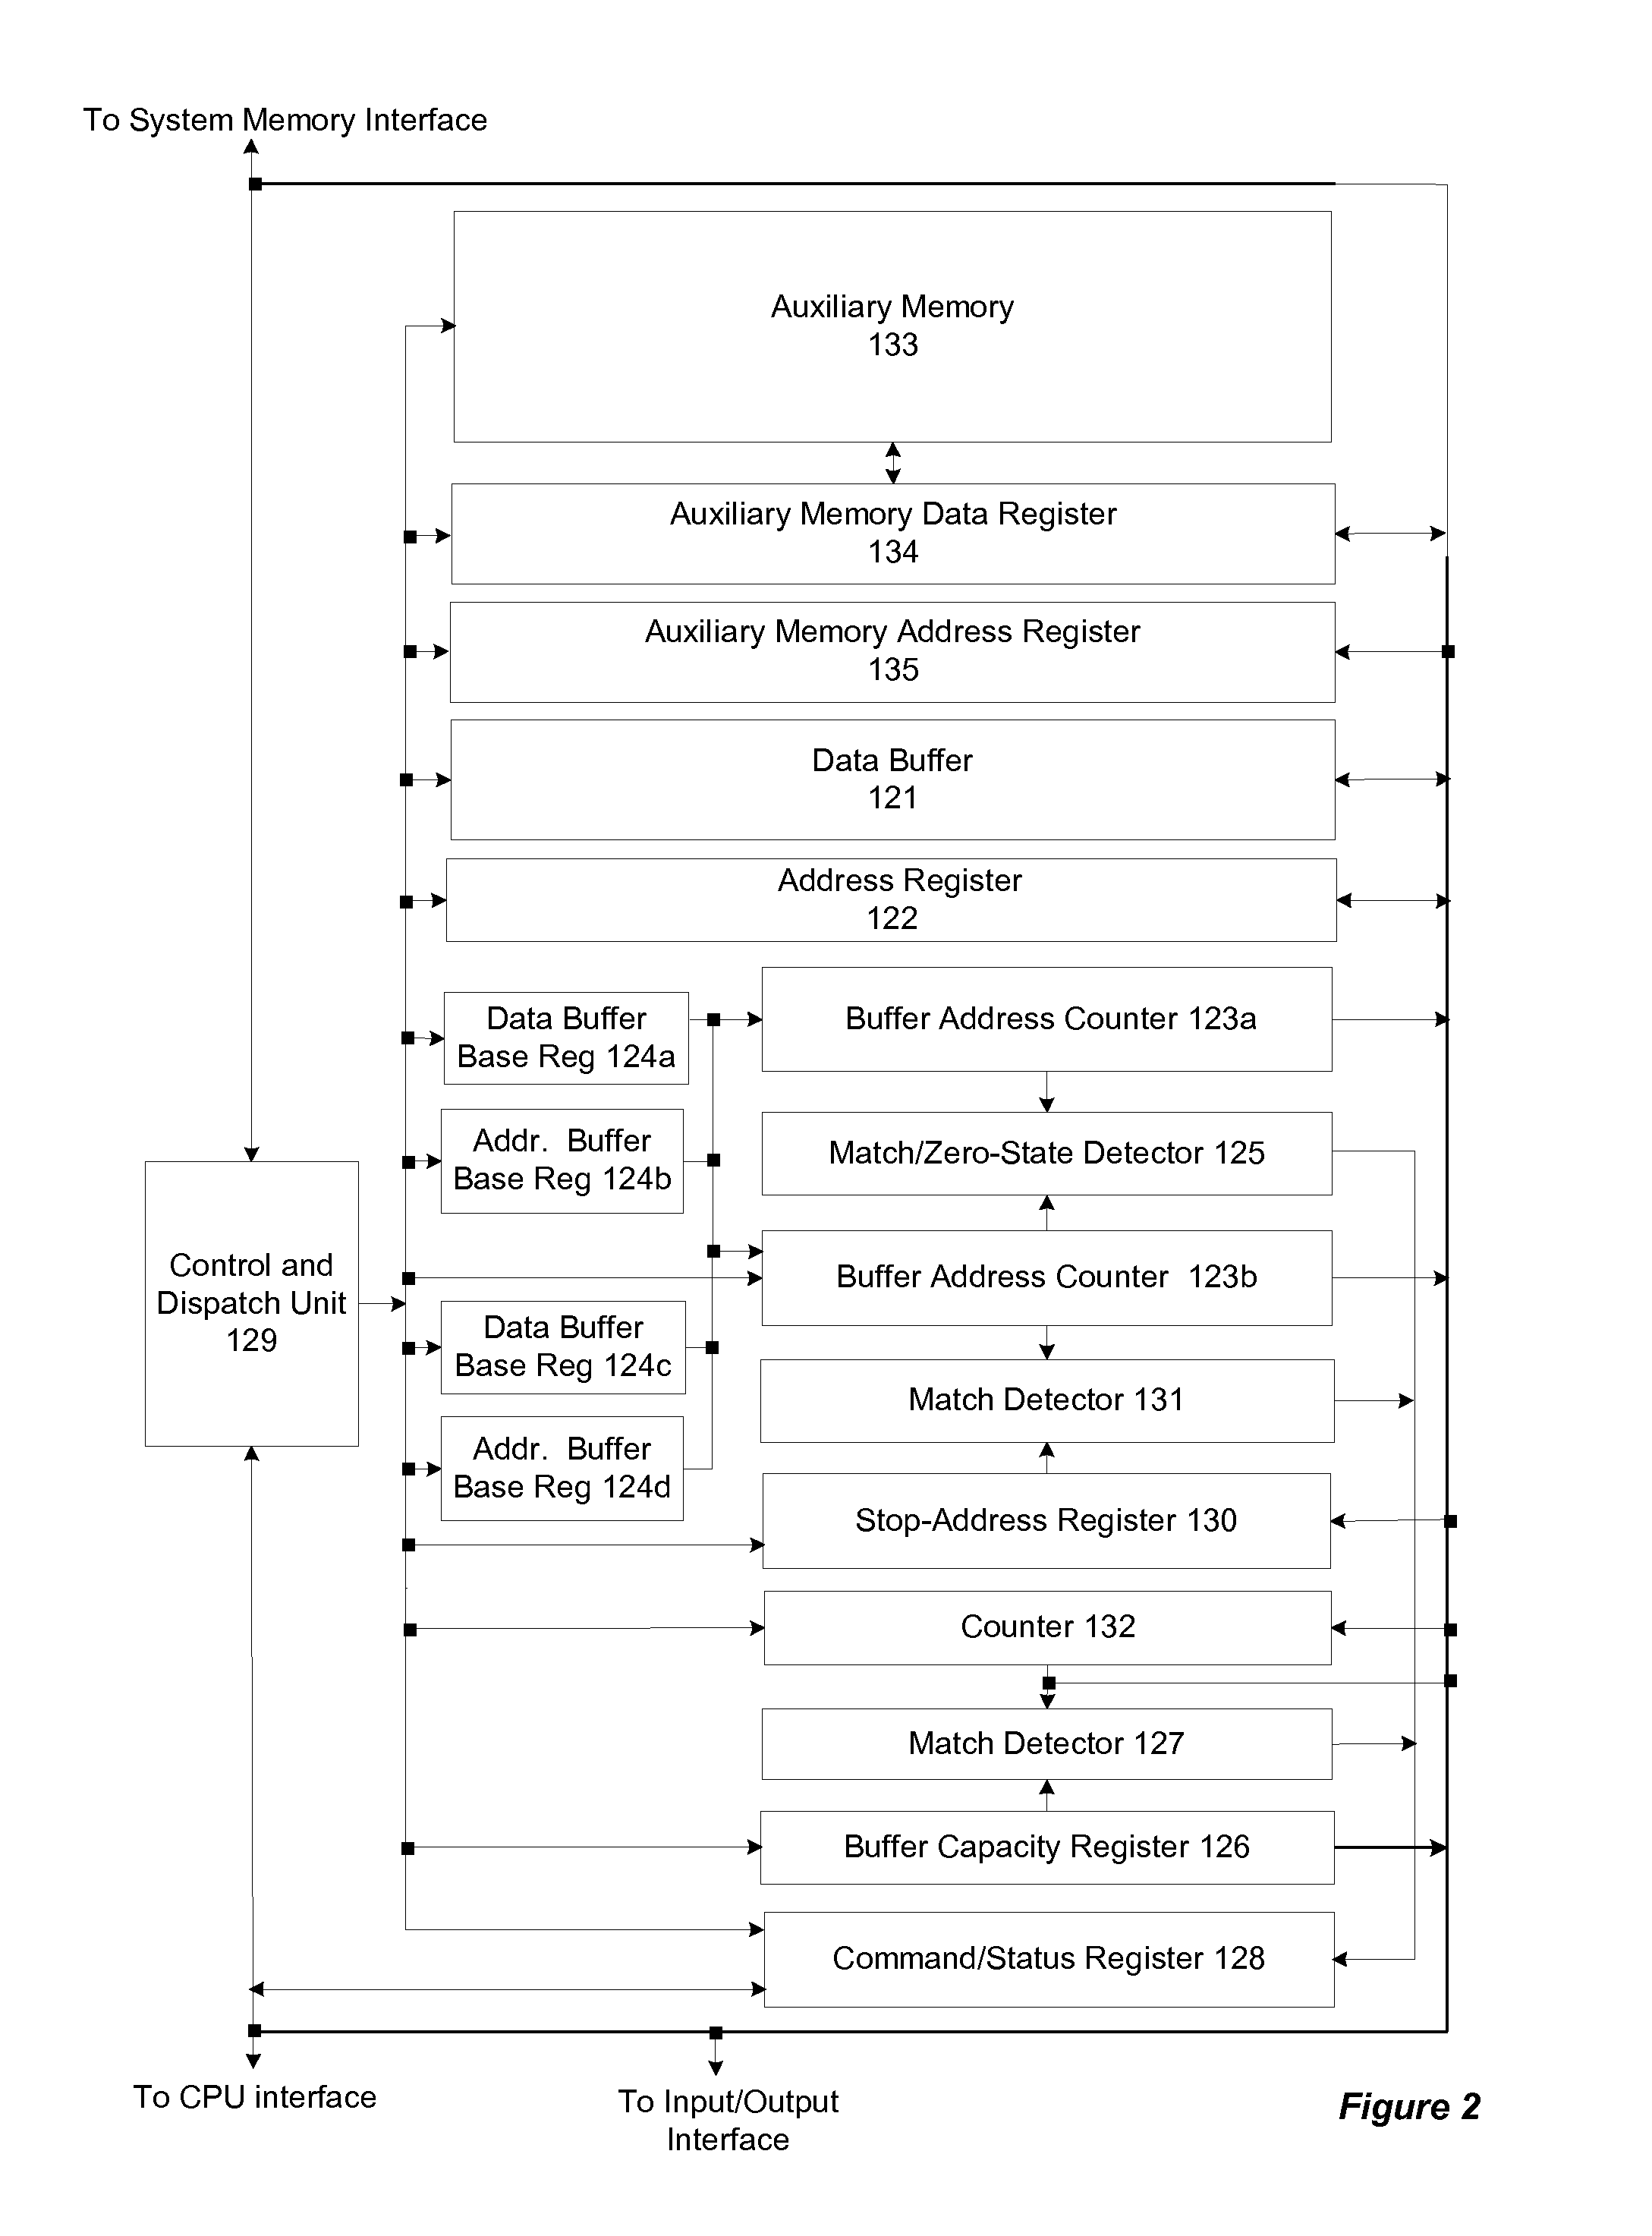 Memory-controller-embedded apparatus and procedure for achieving system-directed checkpointing without operating-system kernel support